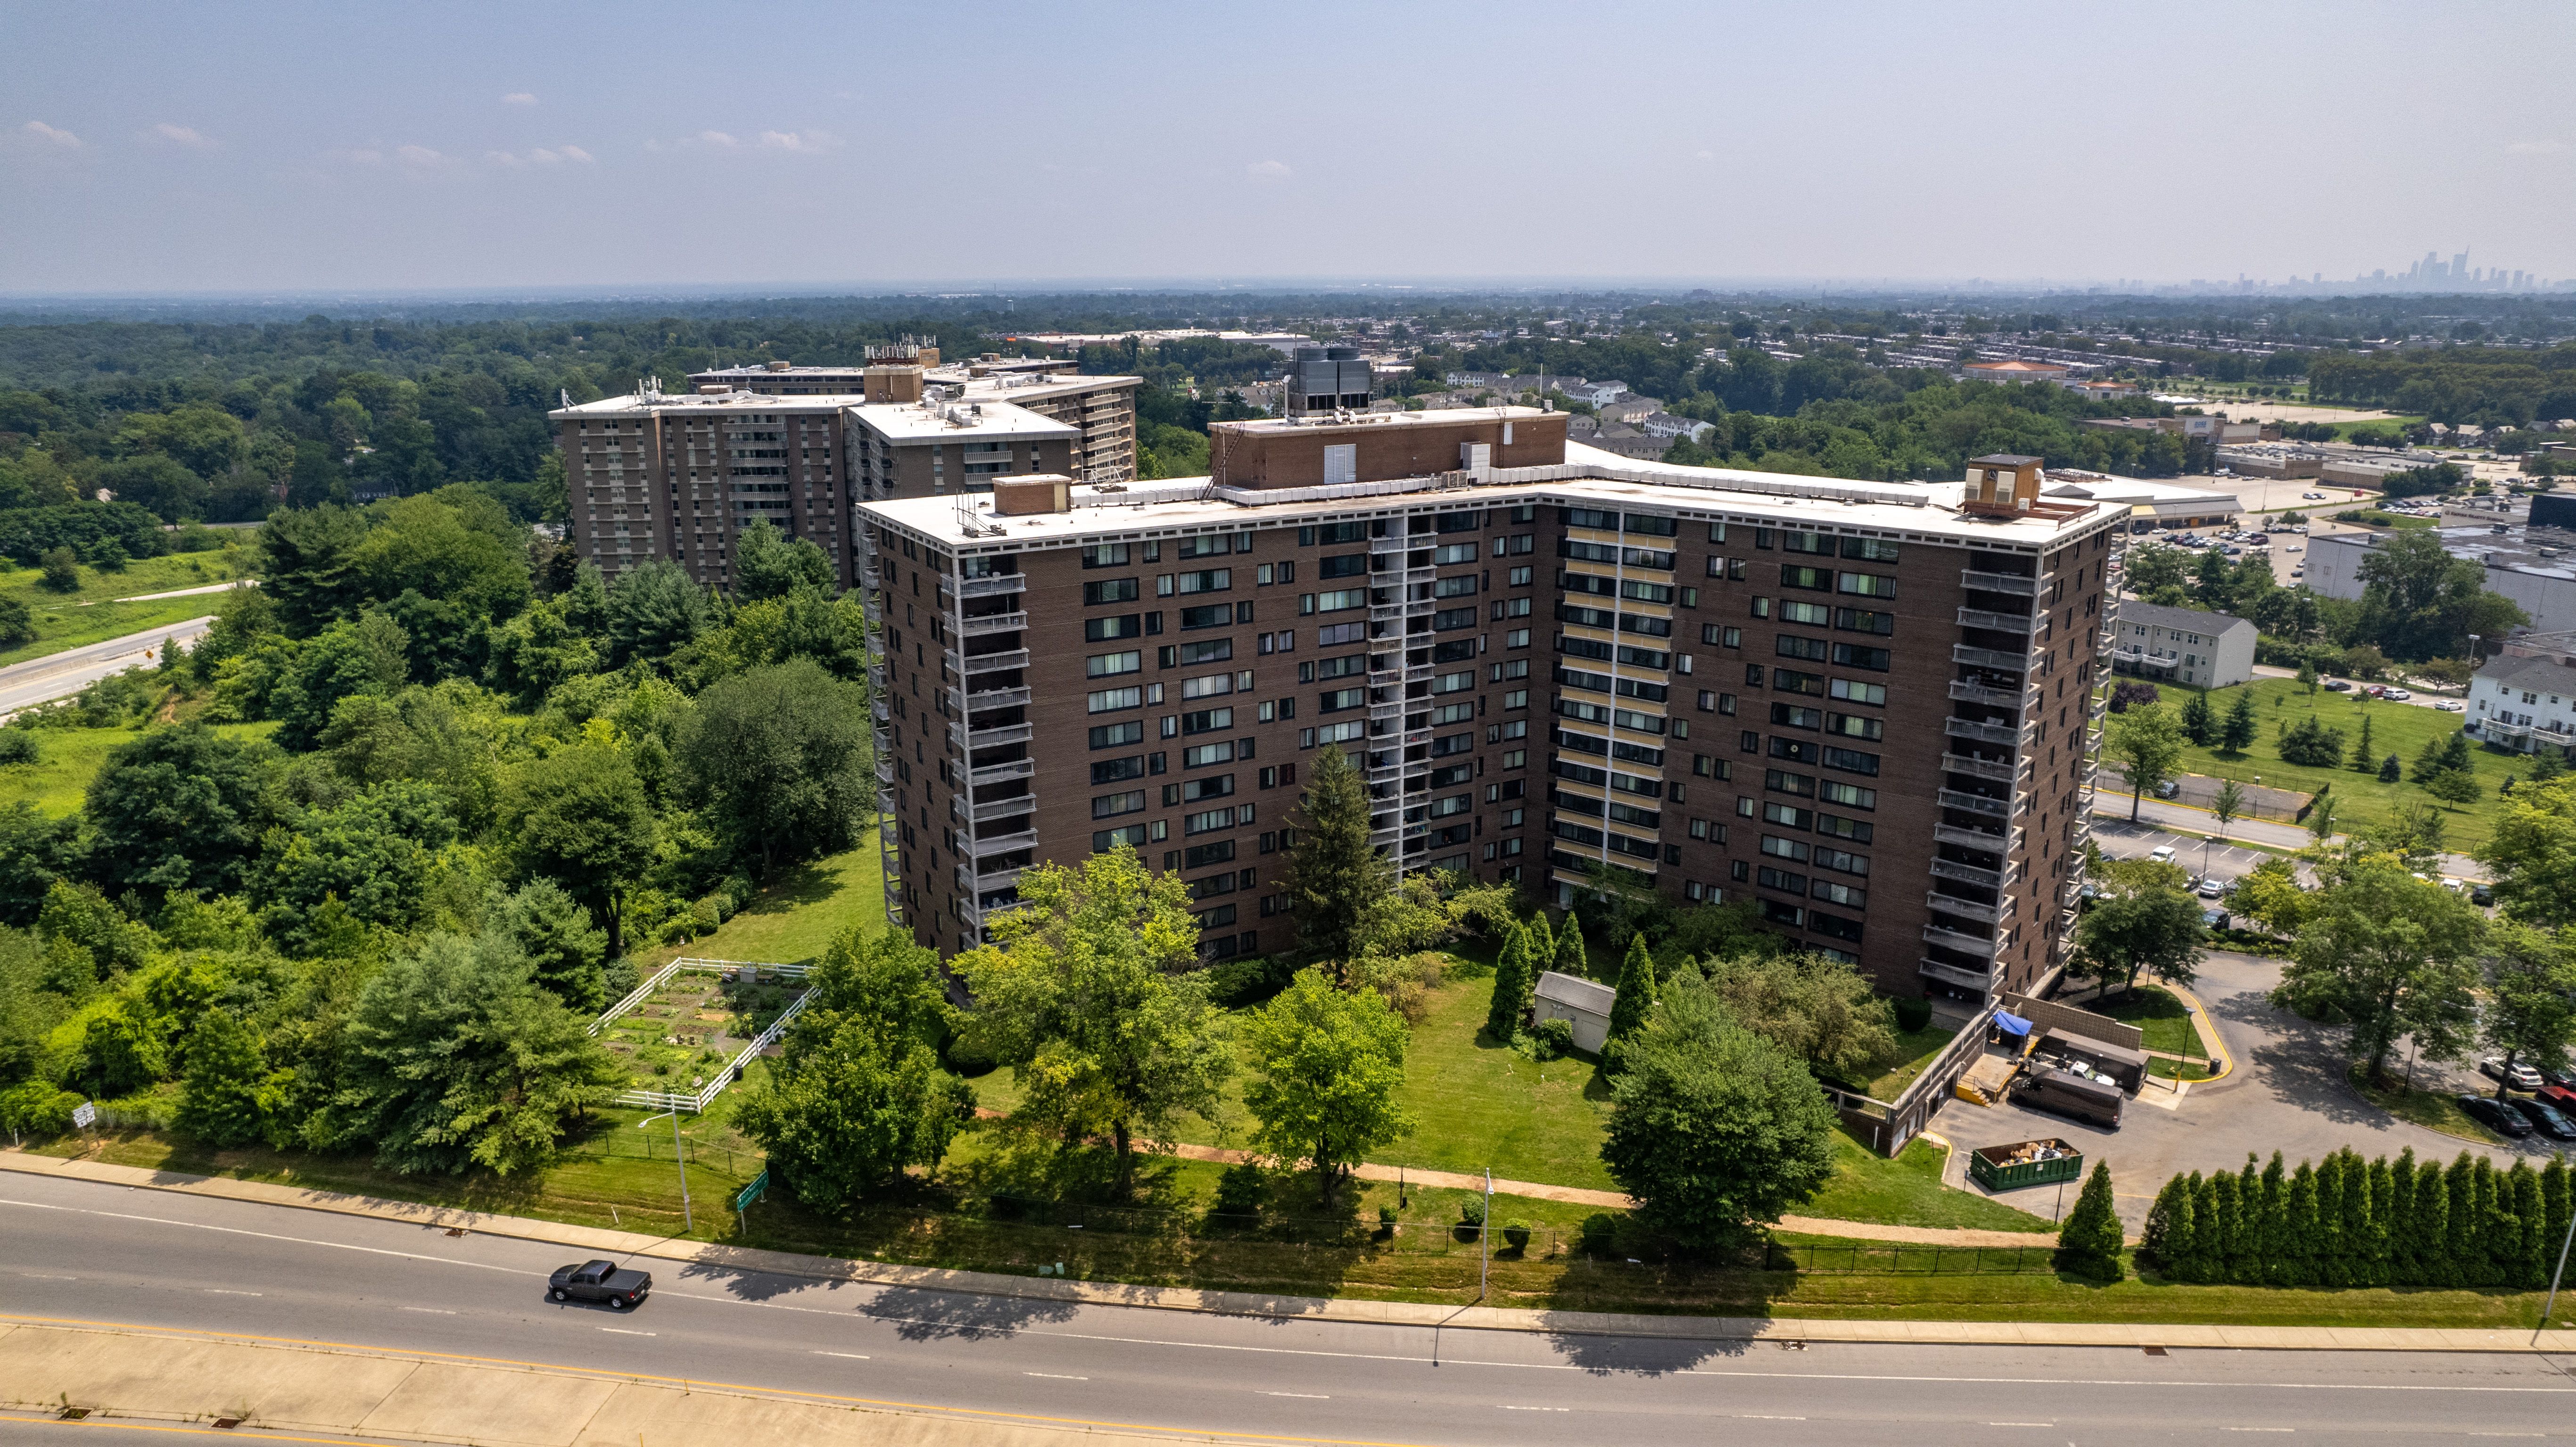 an aerial view of a large apartment building with trees in the foreground and a highway in the